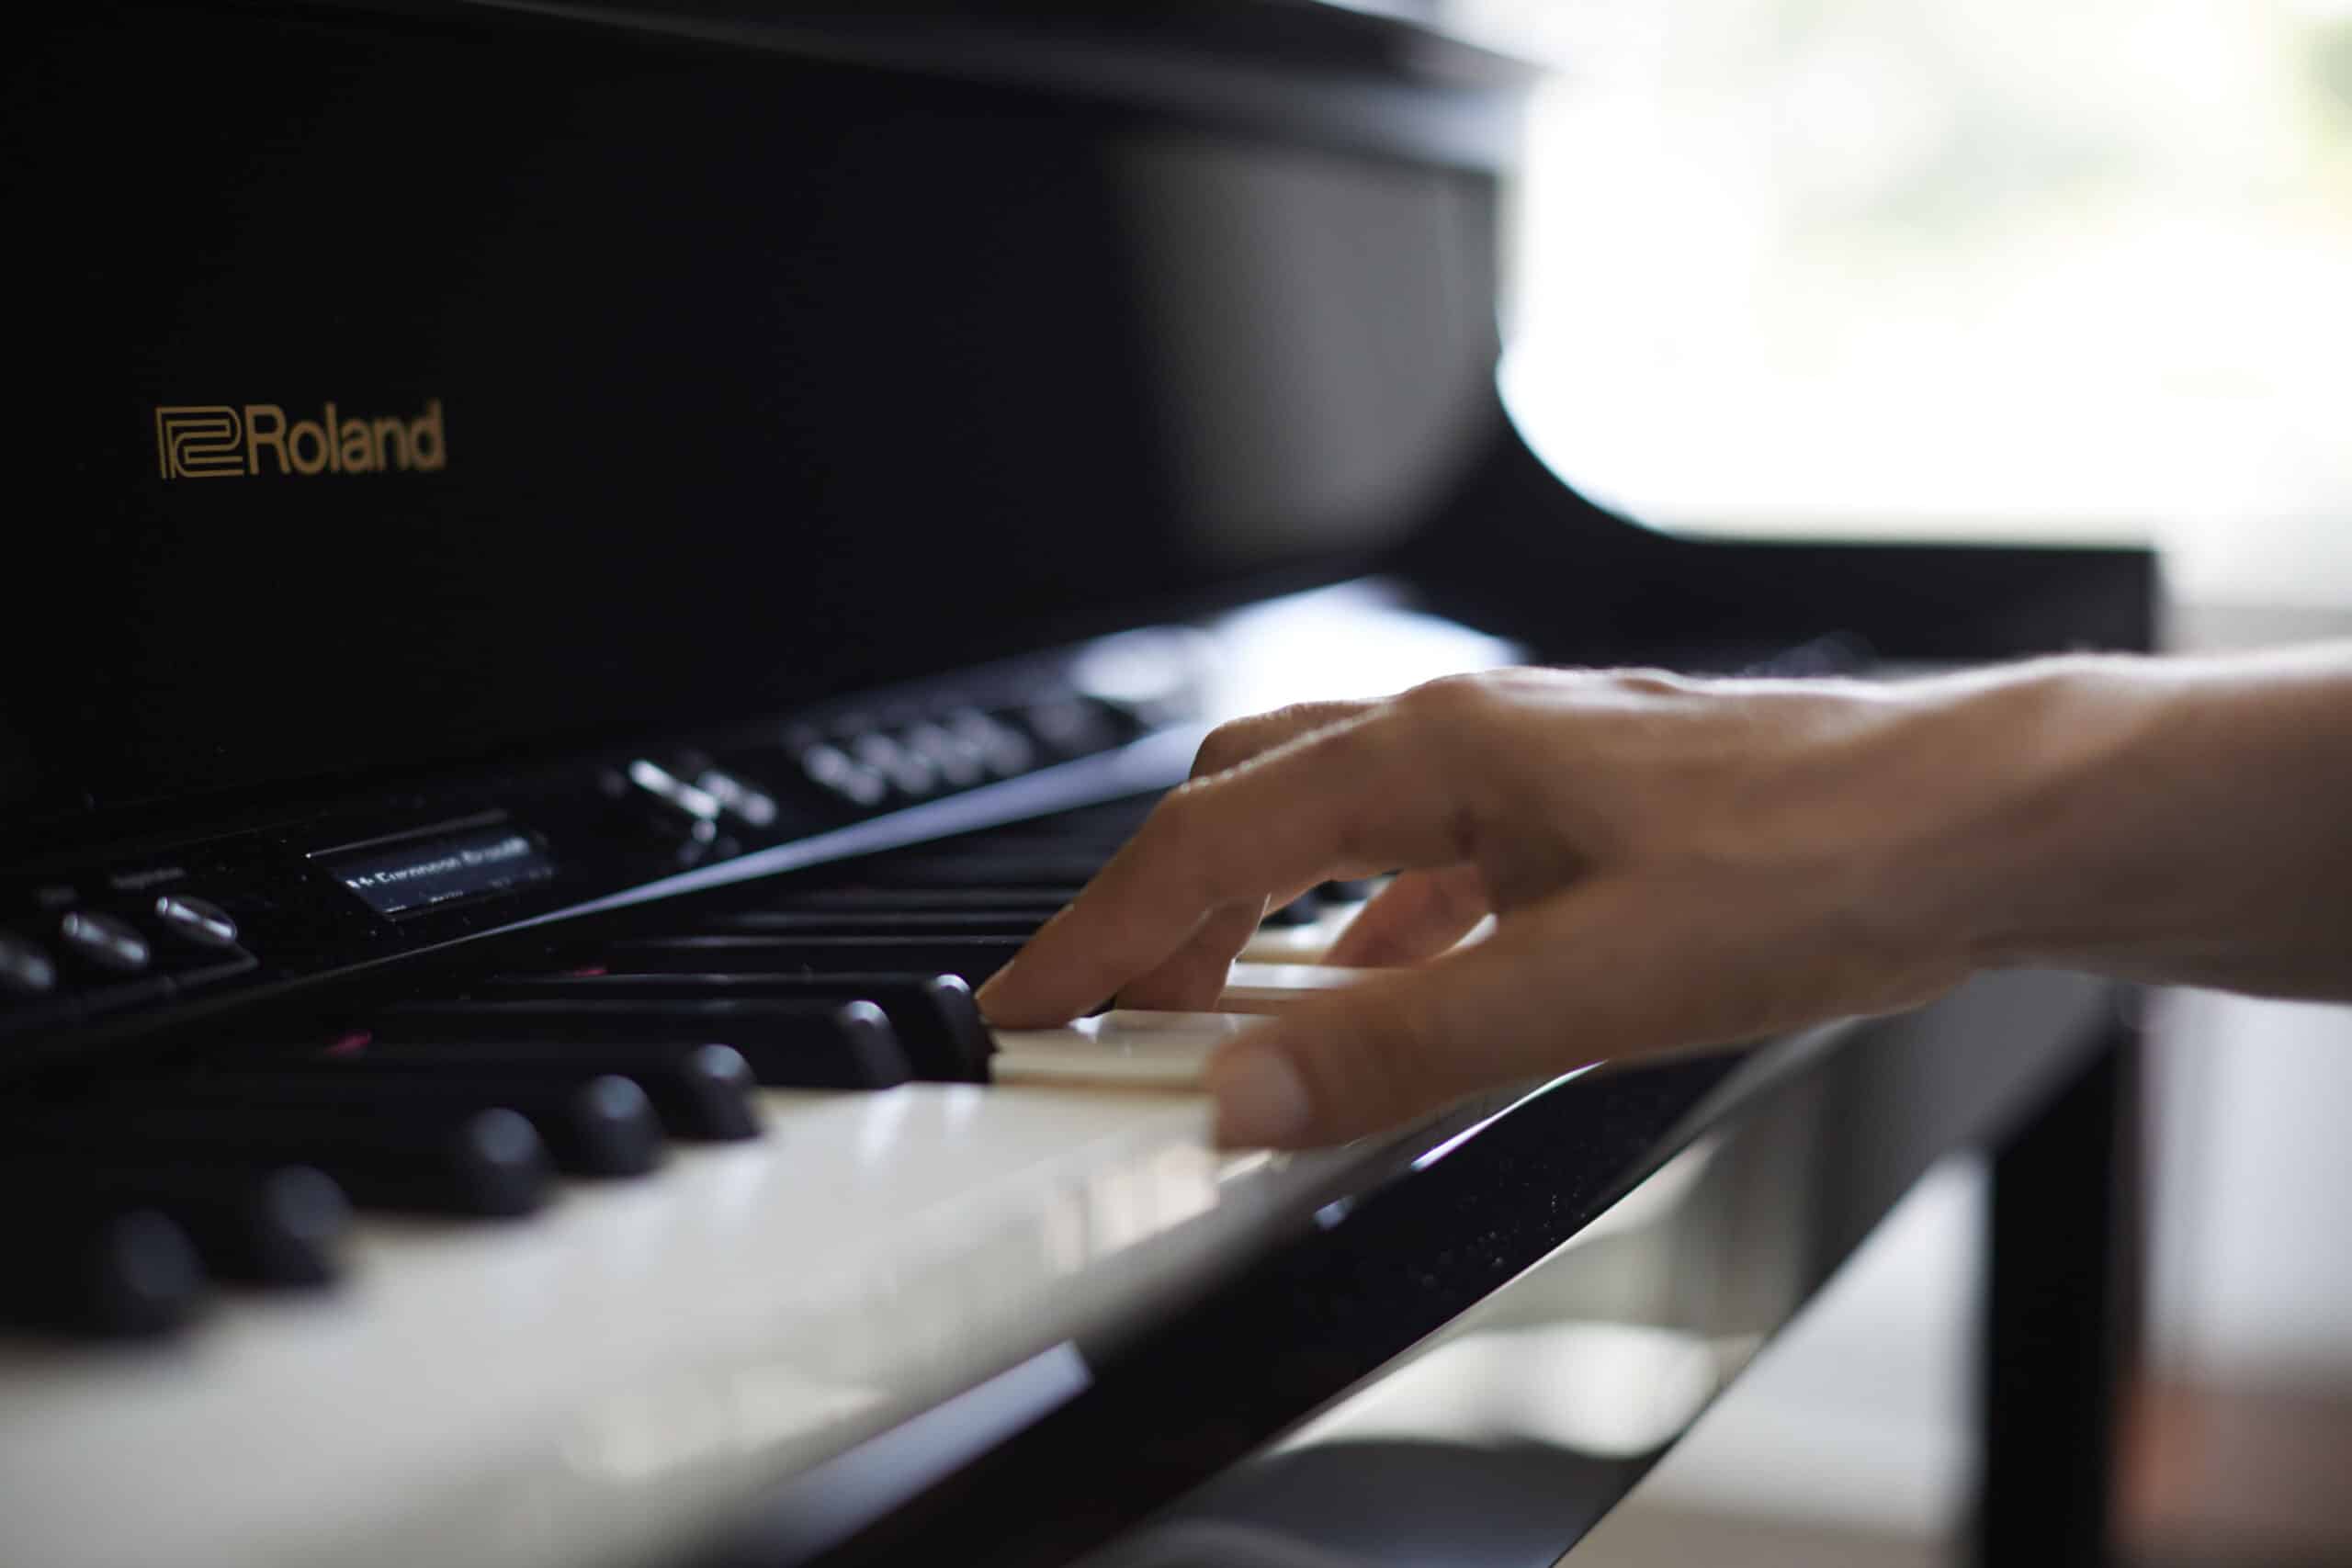 The Roland LX Series – The Ultimate Piano-Playing Experience